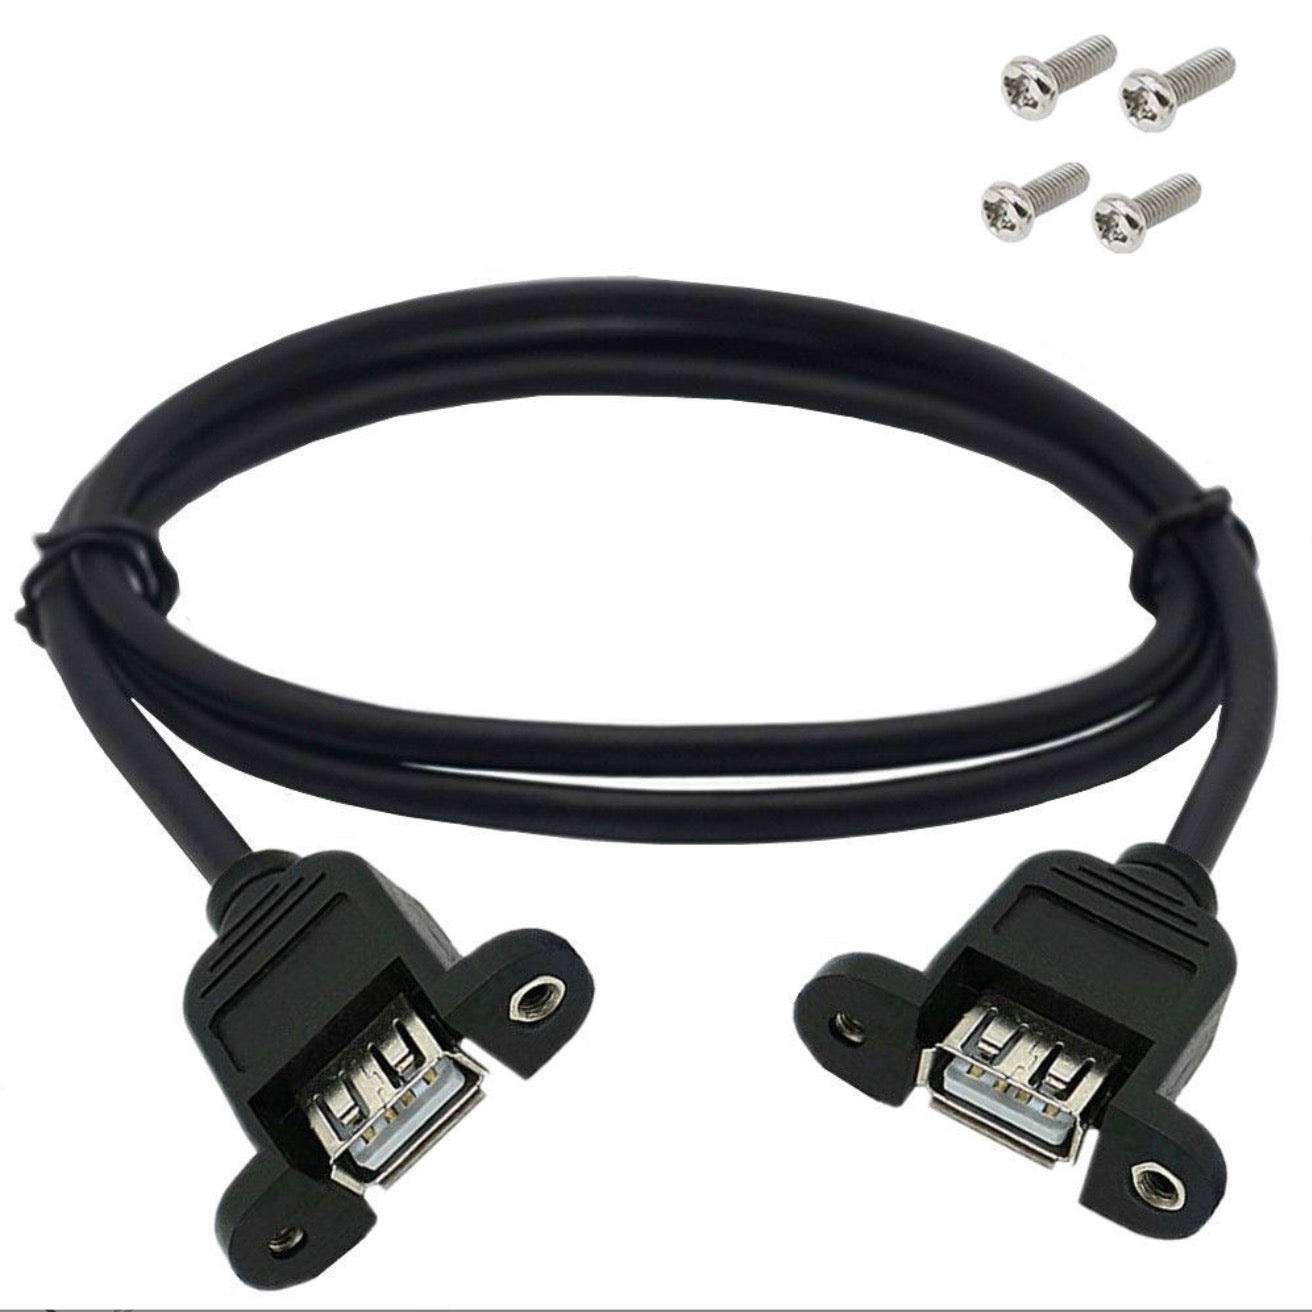 USB 2.0 Type A Female to USB 2.0 A Female Panel Mount Extension Cable